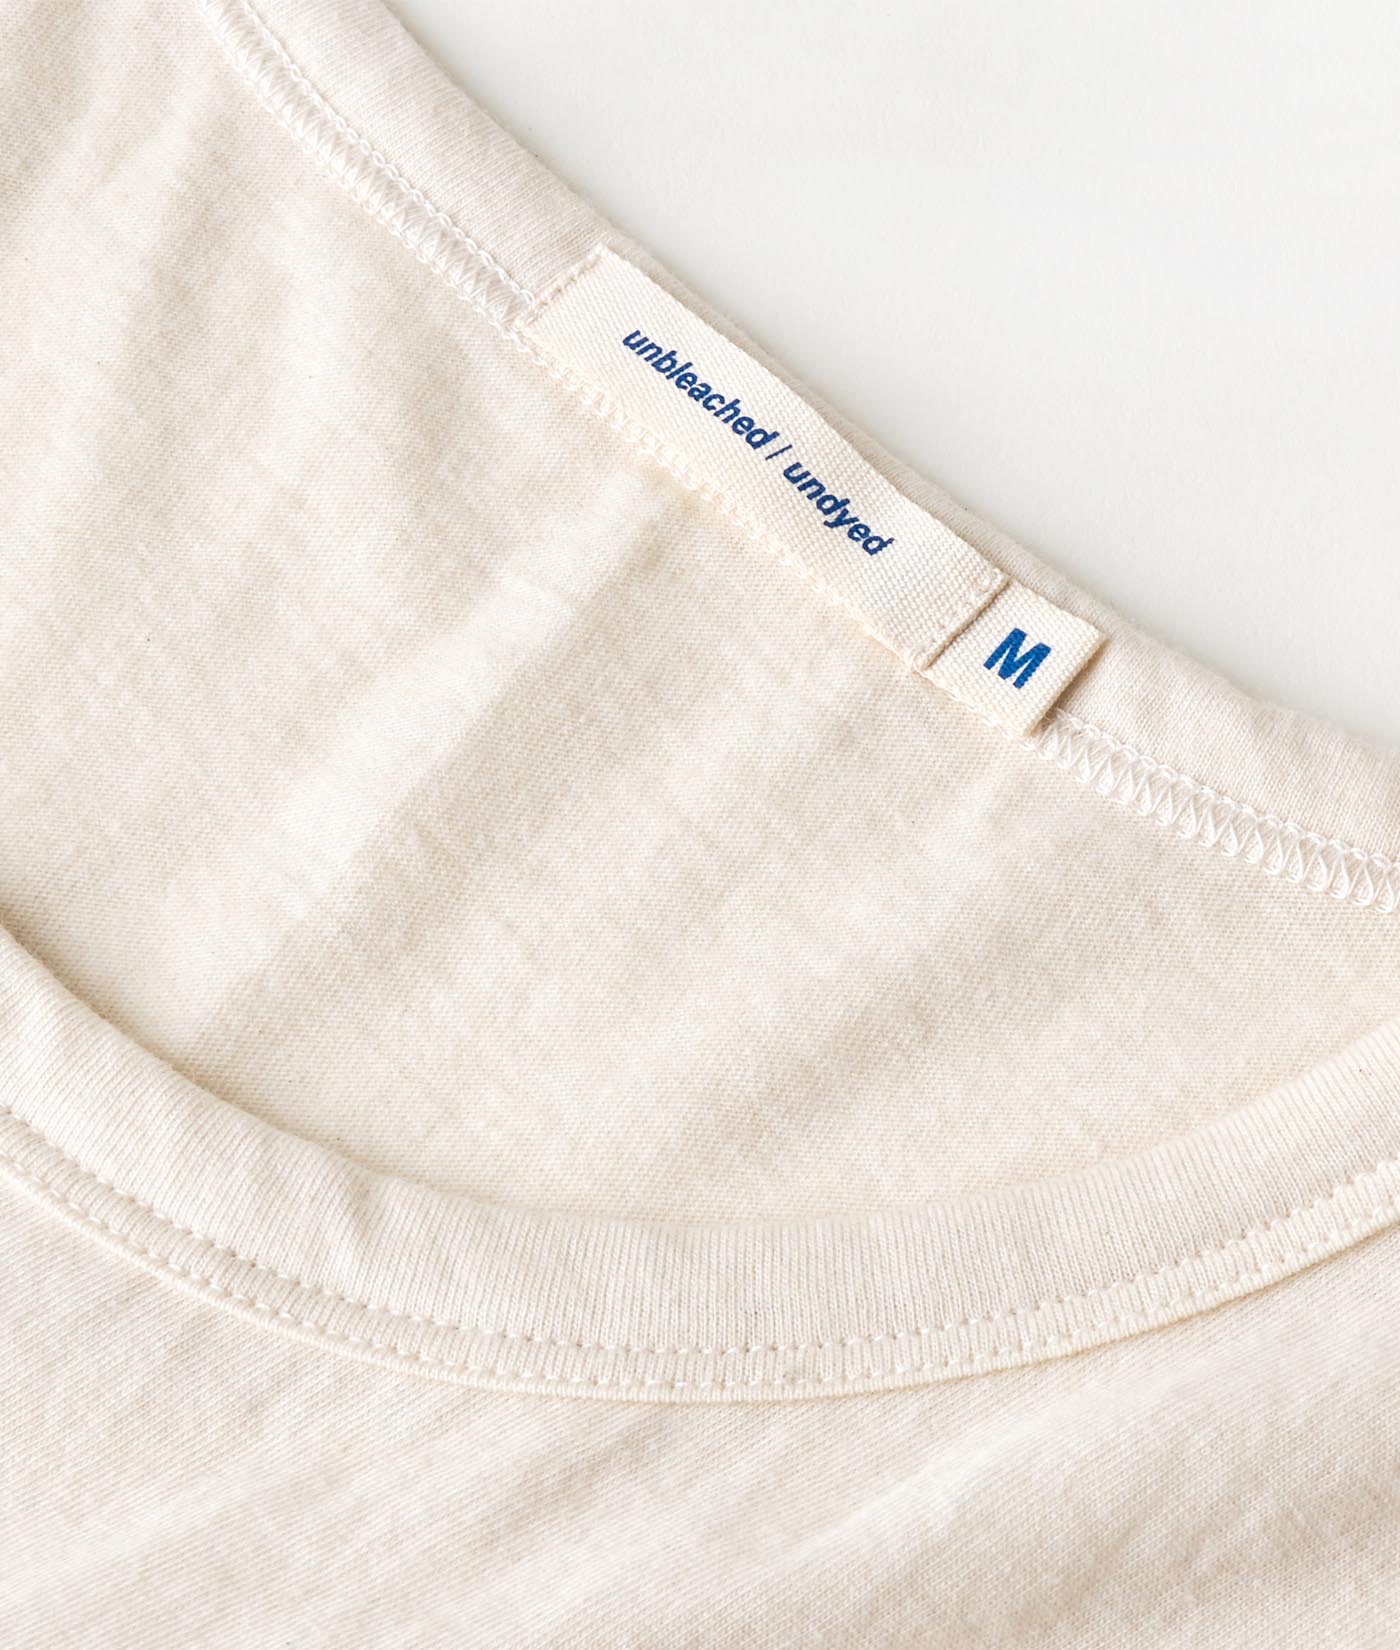 Industry of All Nations Clean Pocket T-Shirt, Undyed